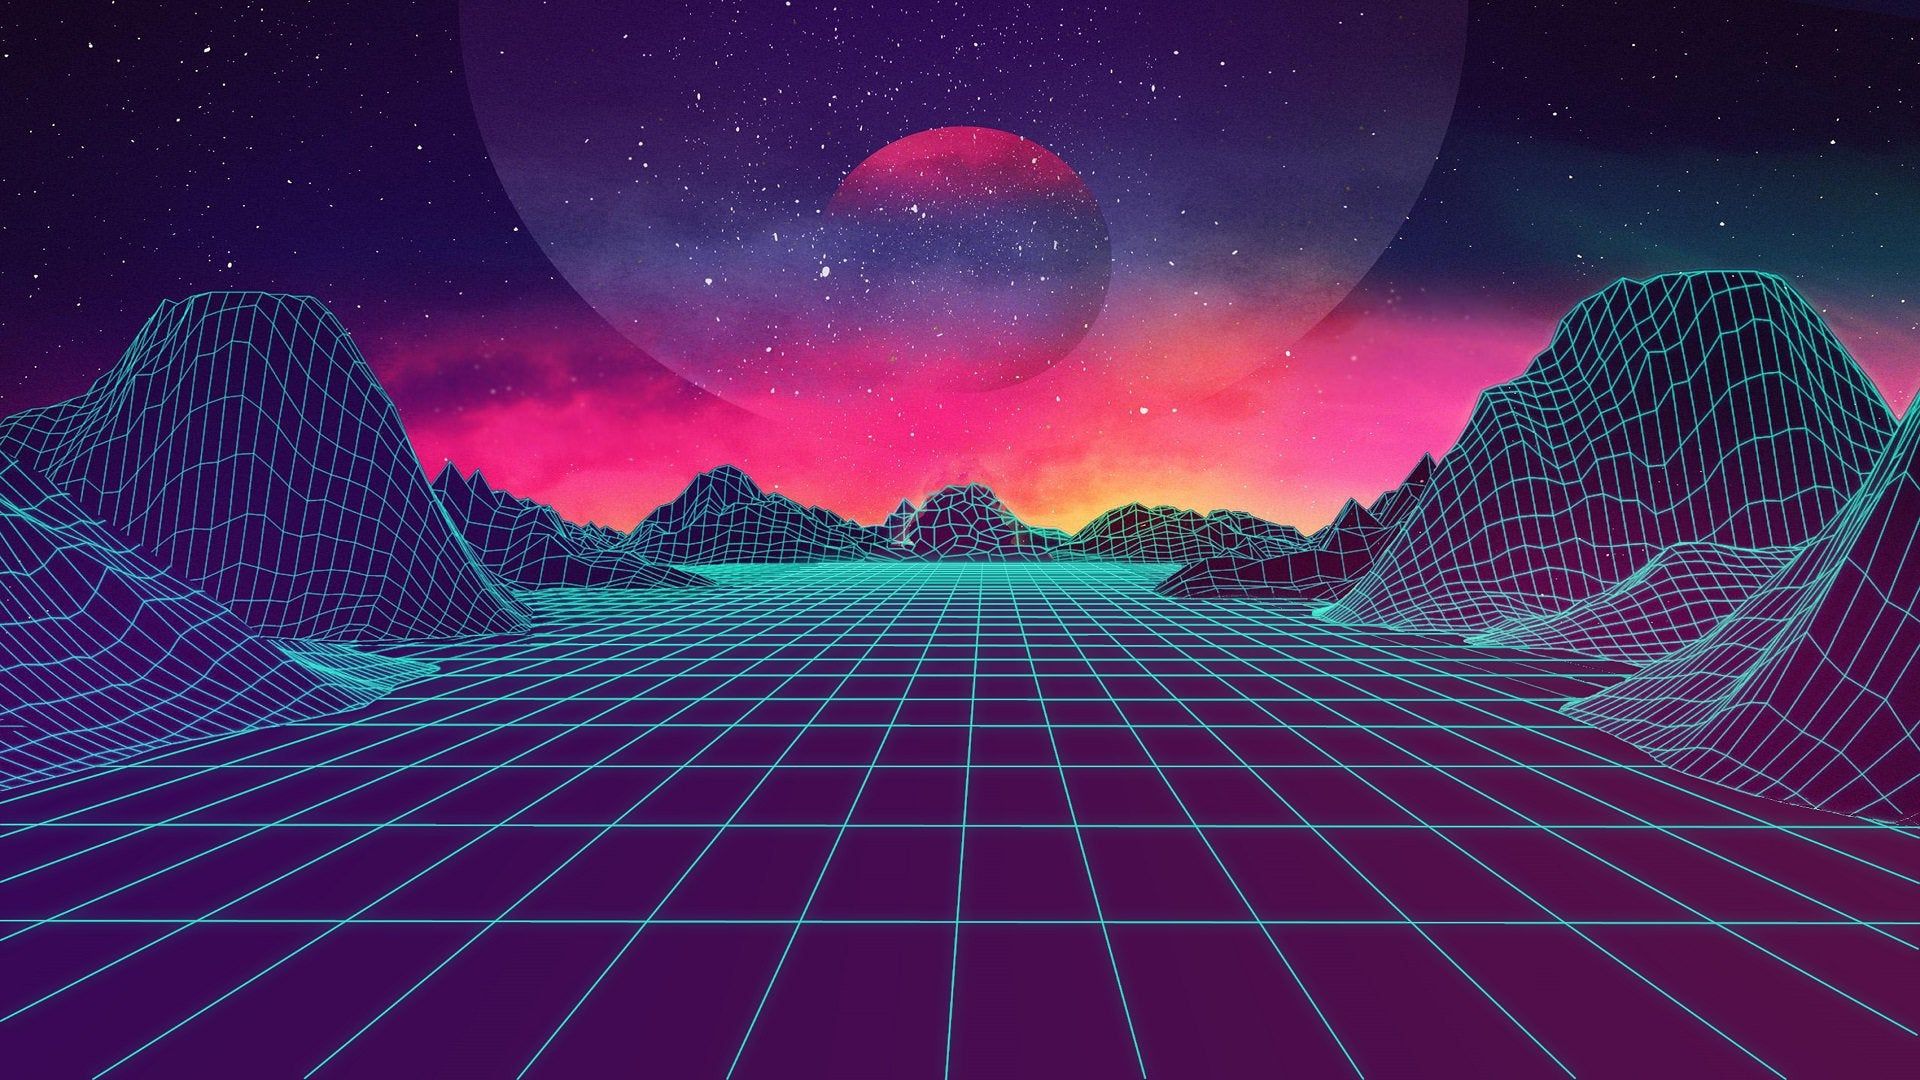 Found this wallpaper you guys might enjoy